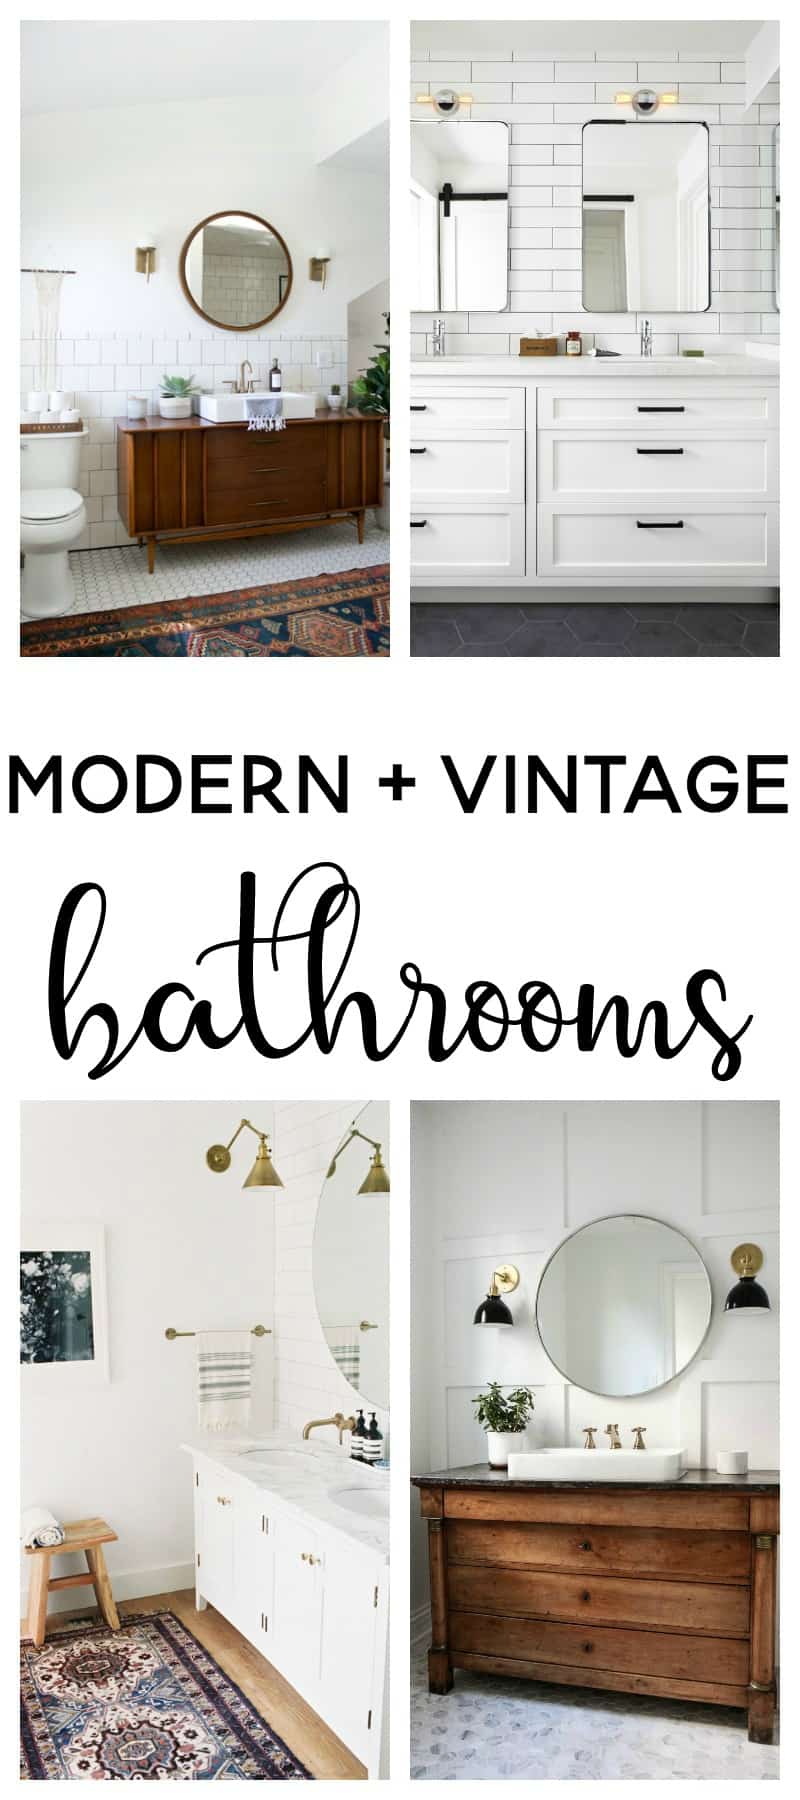 A collage of four images of modern vintage bathrooms. Each image has a bathroom vanity, mirrors and vintage style light fixtures. Image text reads "modern + vintage bathrooms"